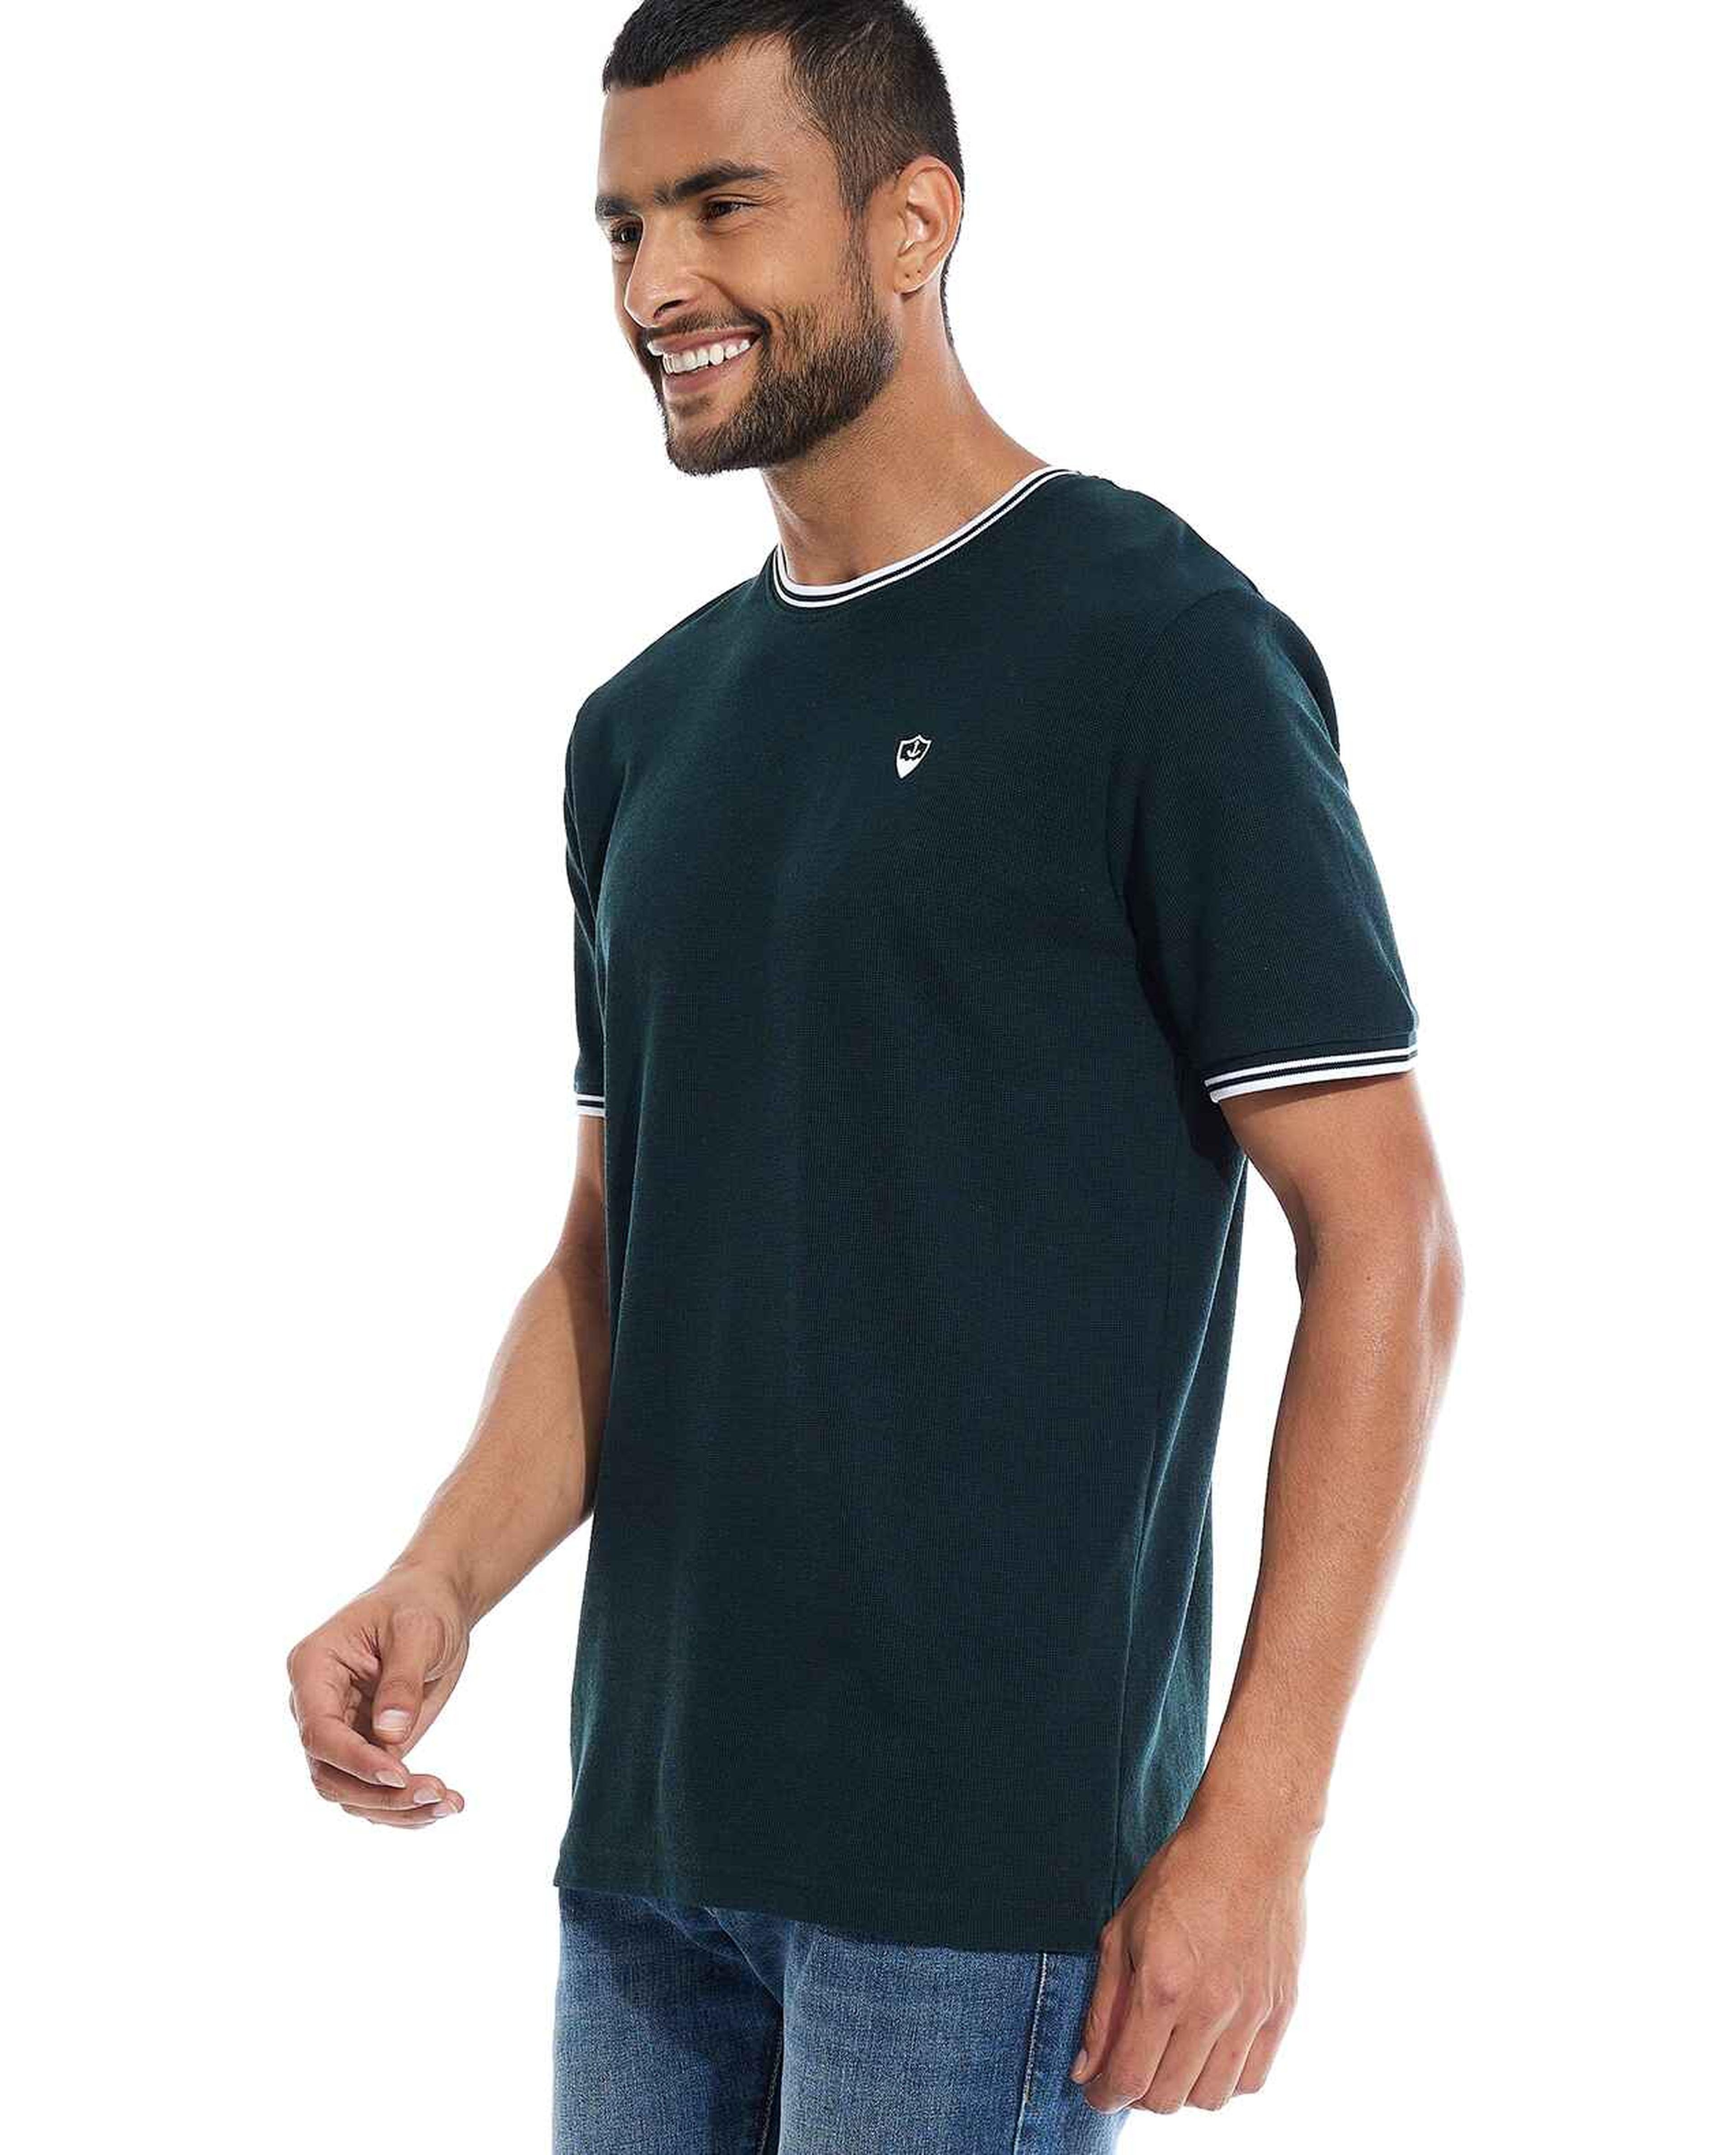 Contrast Tipping T-Shirt with Crew Neck and Short Sleeves